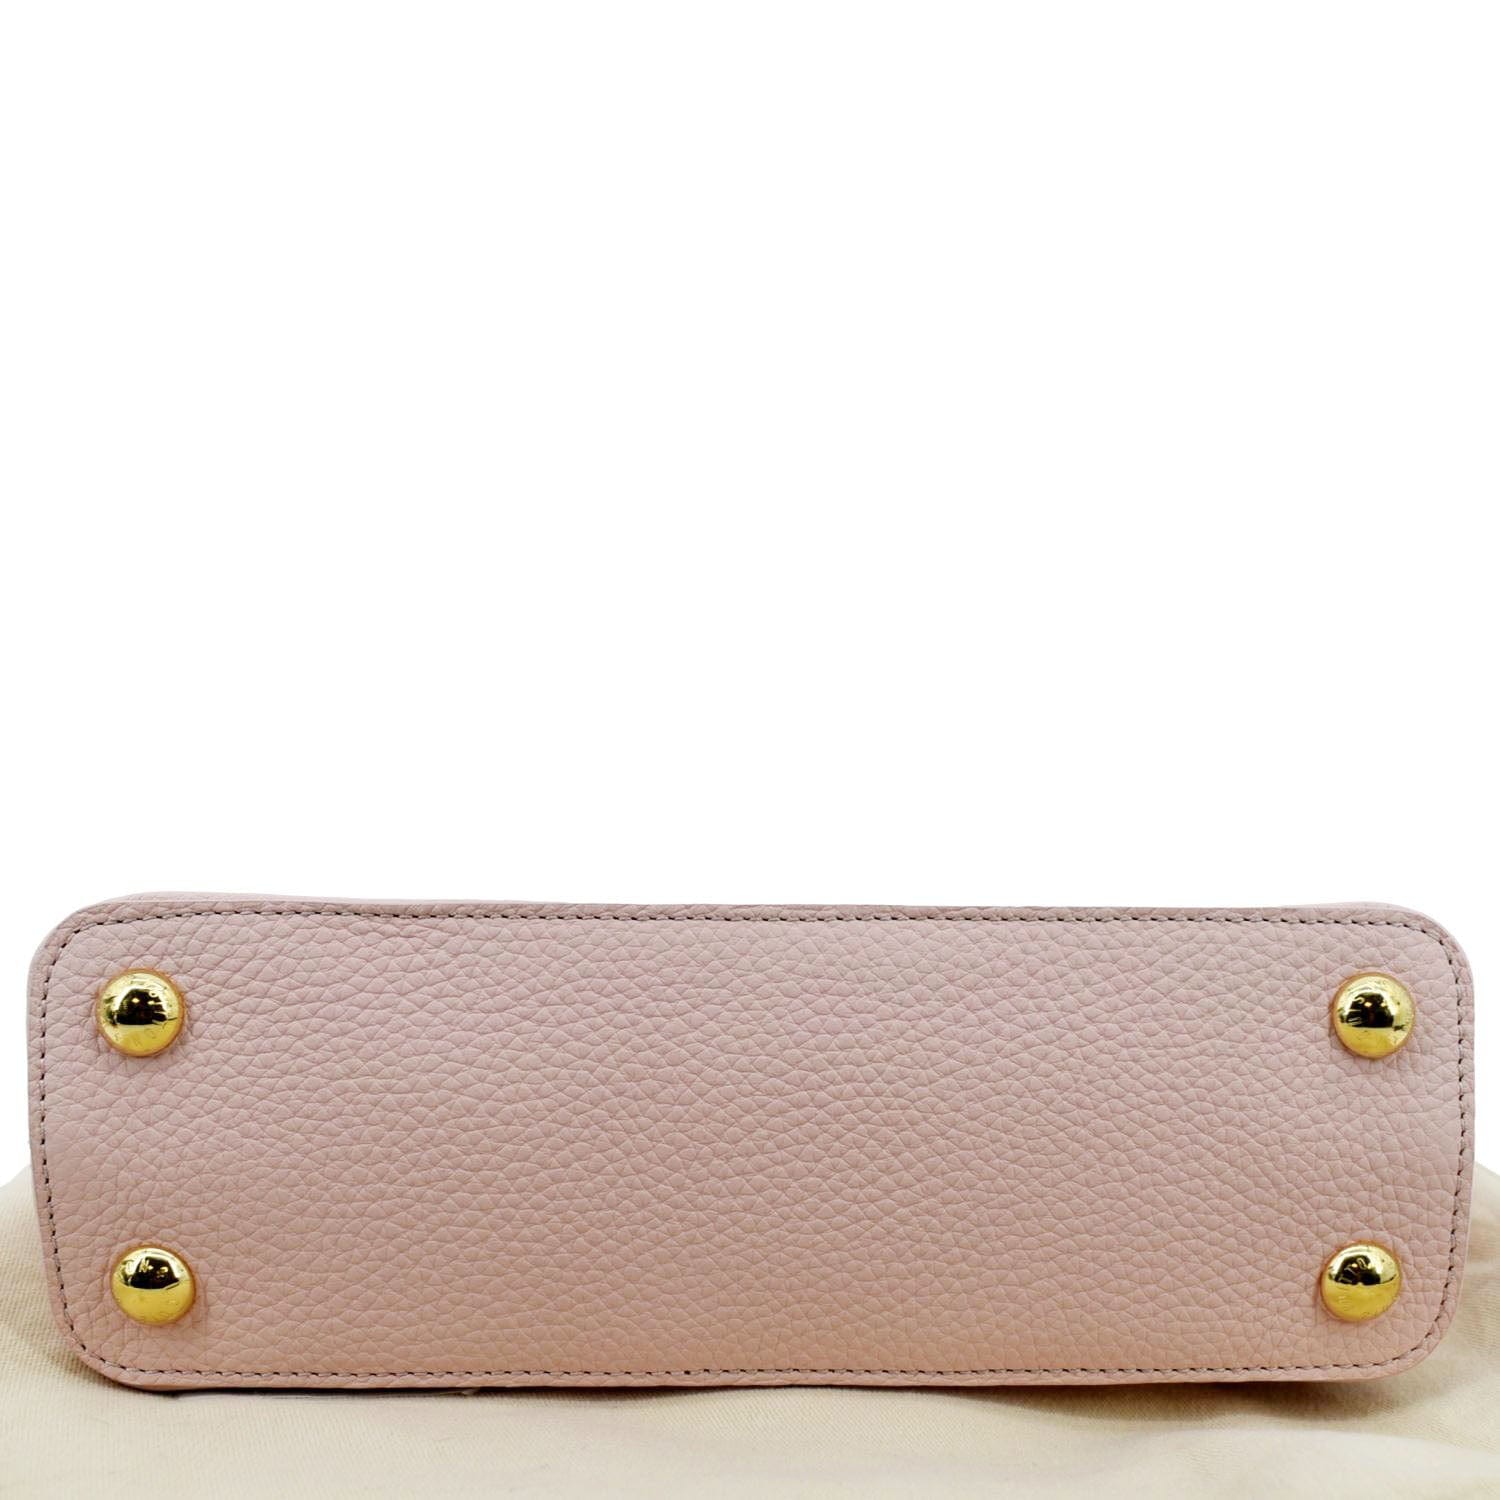 LOUIS VUITTON Capucines MM Taurillon Leather Pink – ALB